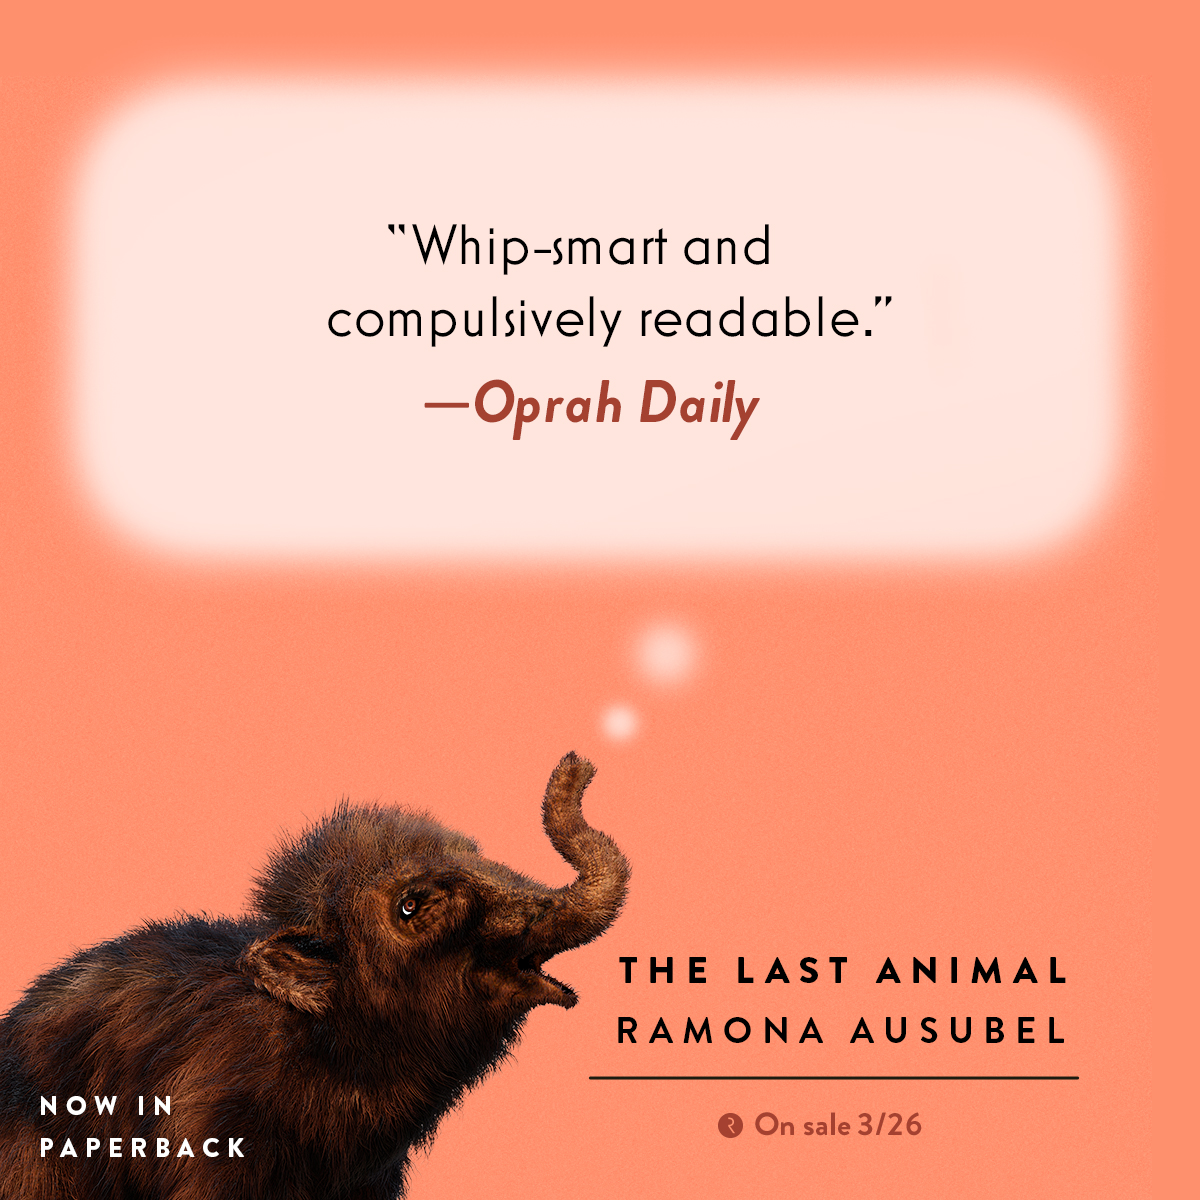 'Surprising, funny, and poignant...both a wildly entertaining adventure story and a meditation on what it means to love.' @OprahDaily @ramona_ausubel's stunning and lovely novel, THE LAST ANIMAL, is now available to read in paperback! Get your copy today: bit.ly/3yWTuBo